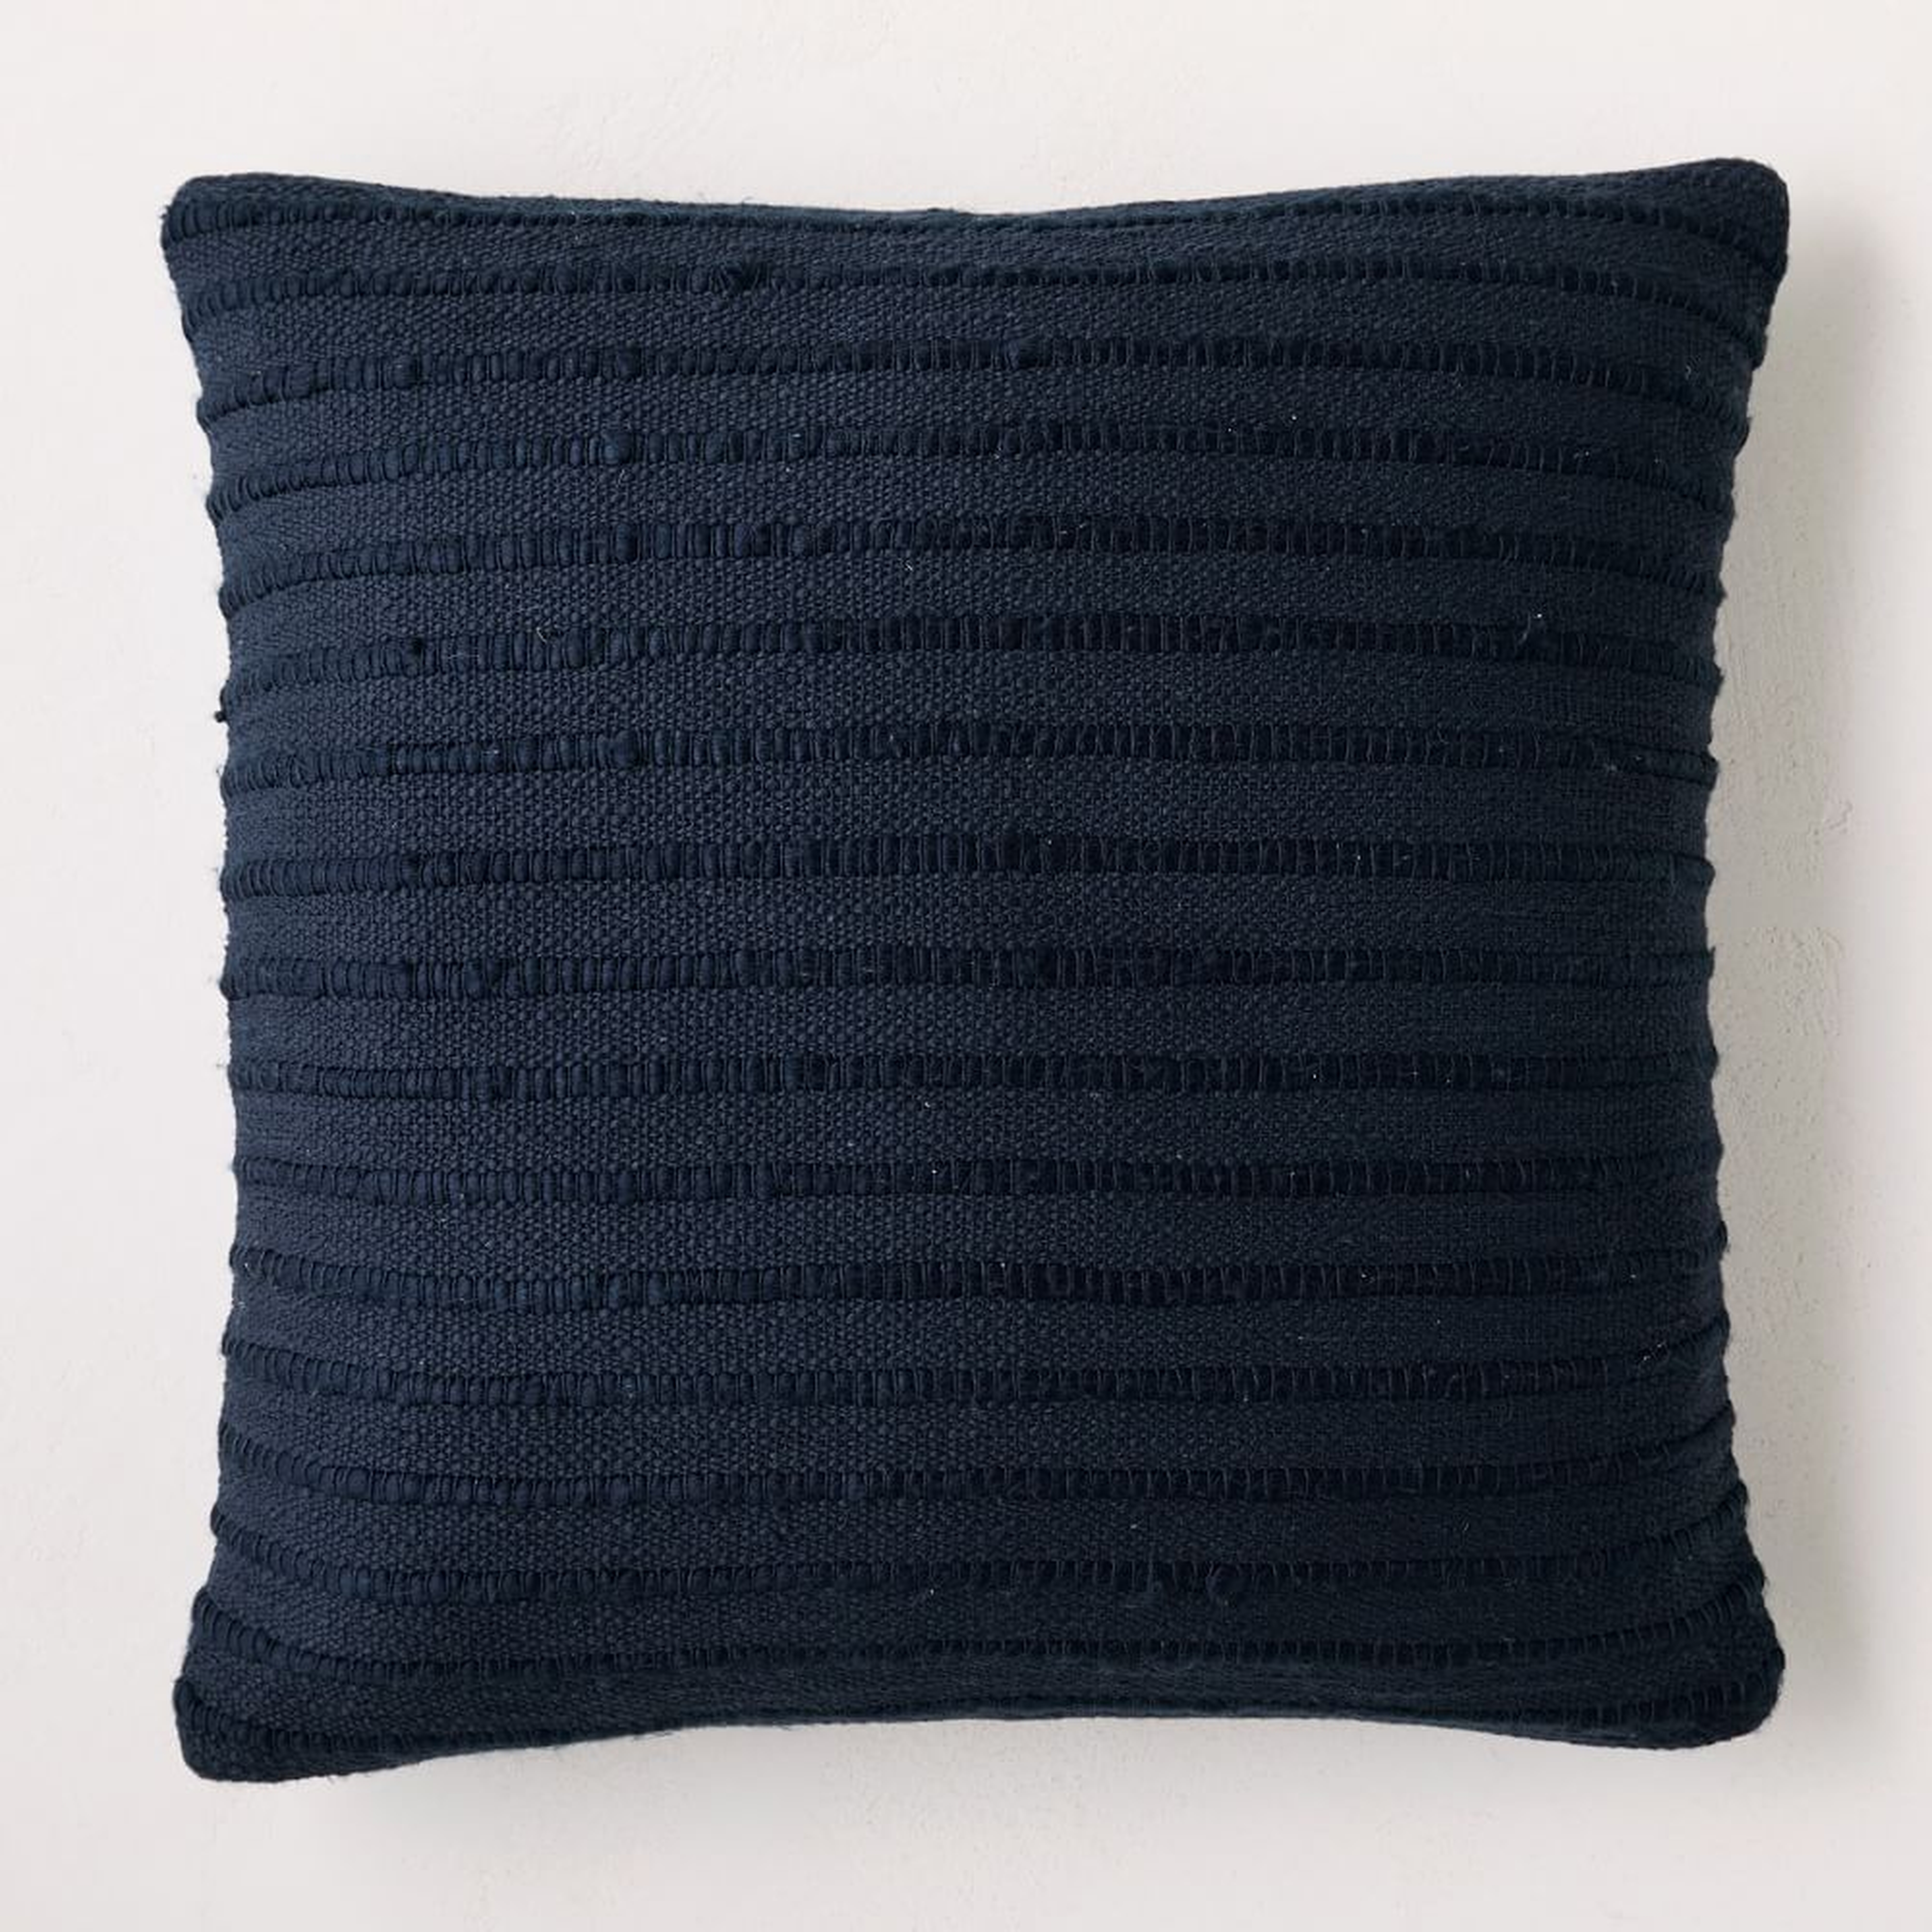 Soft Corded Pillow Cover, 20"x20", Midnight - West Elm